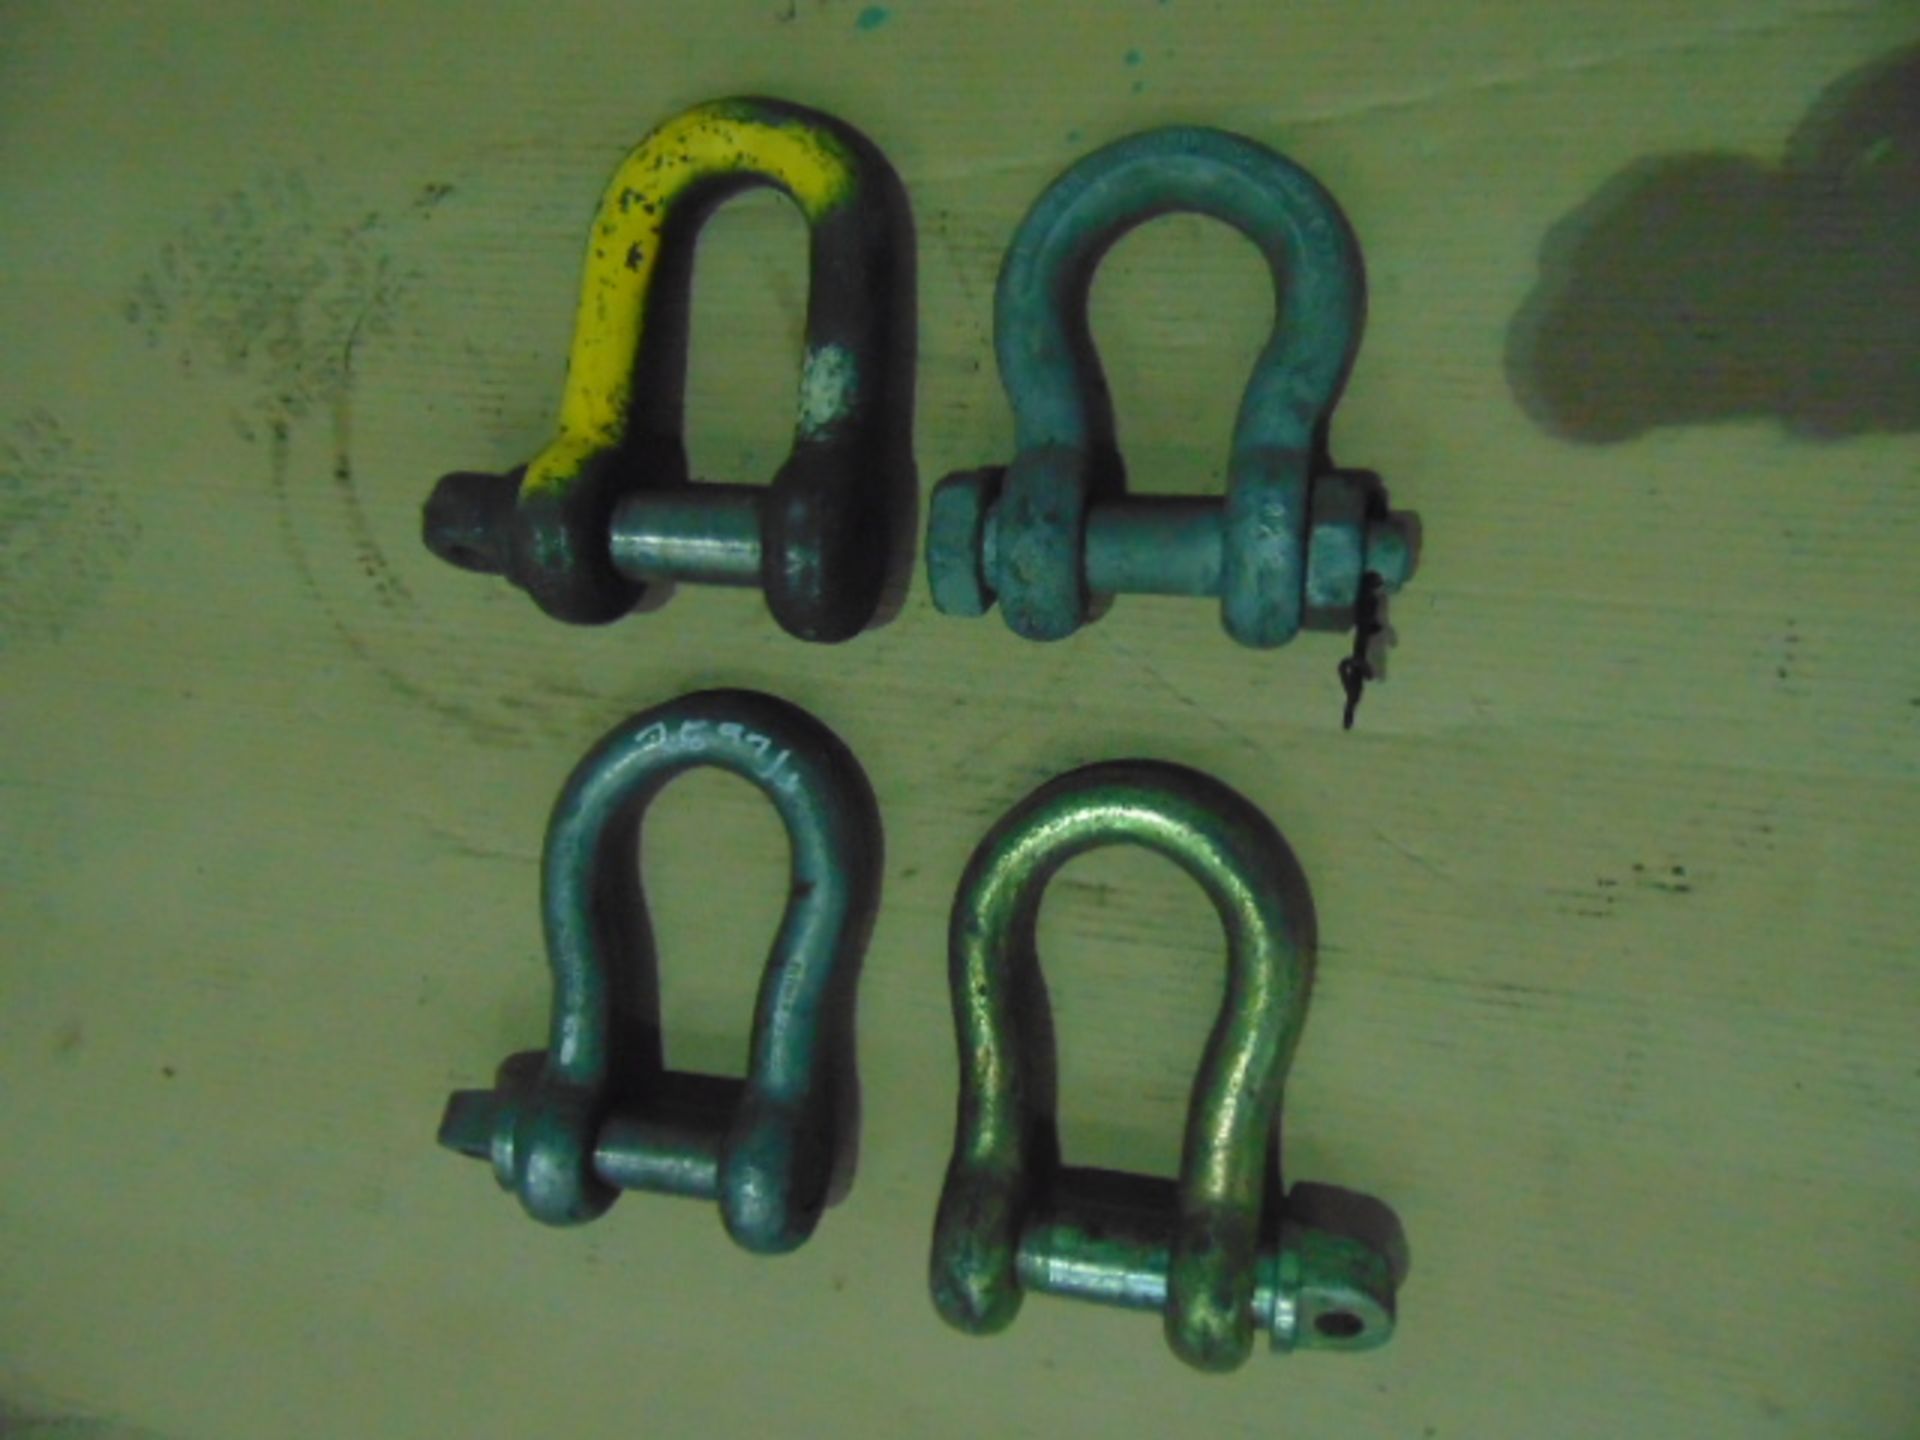 You are bidding on 4 x 21T Recovery Shackles. These Recovery Shackles are sold as seen. There is